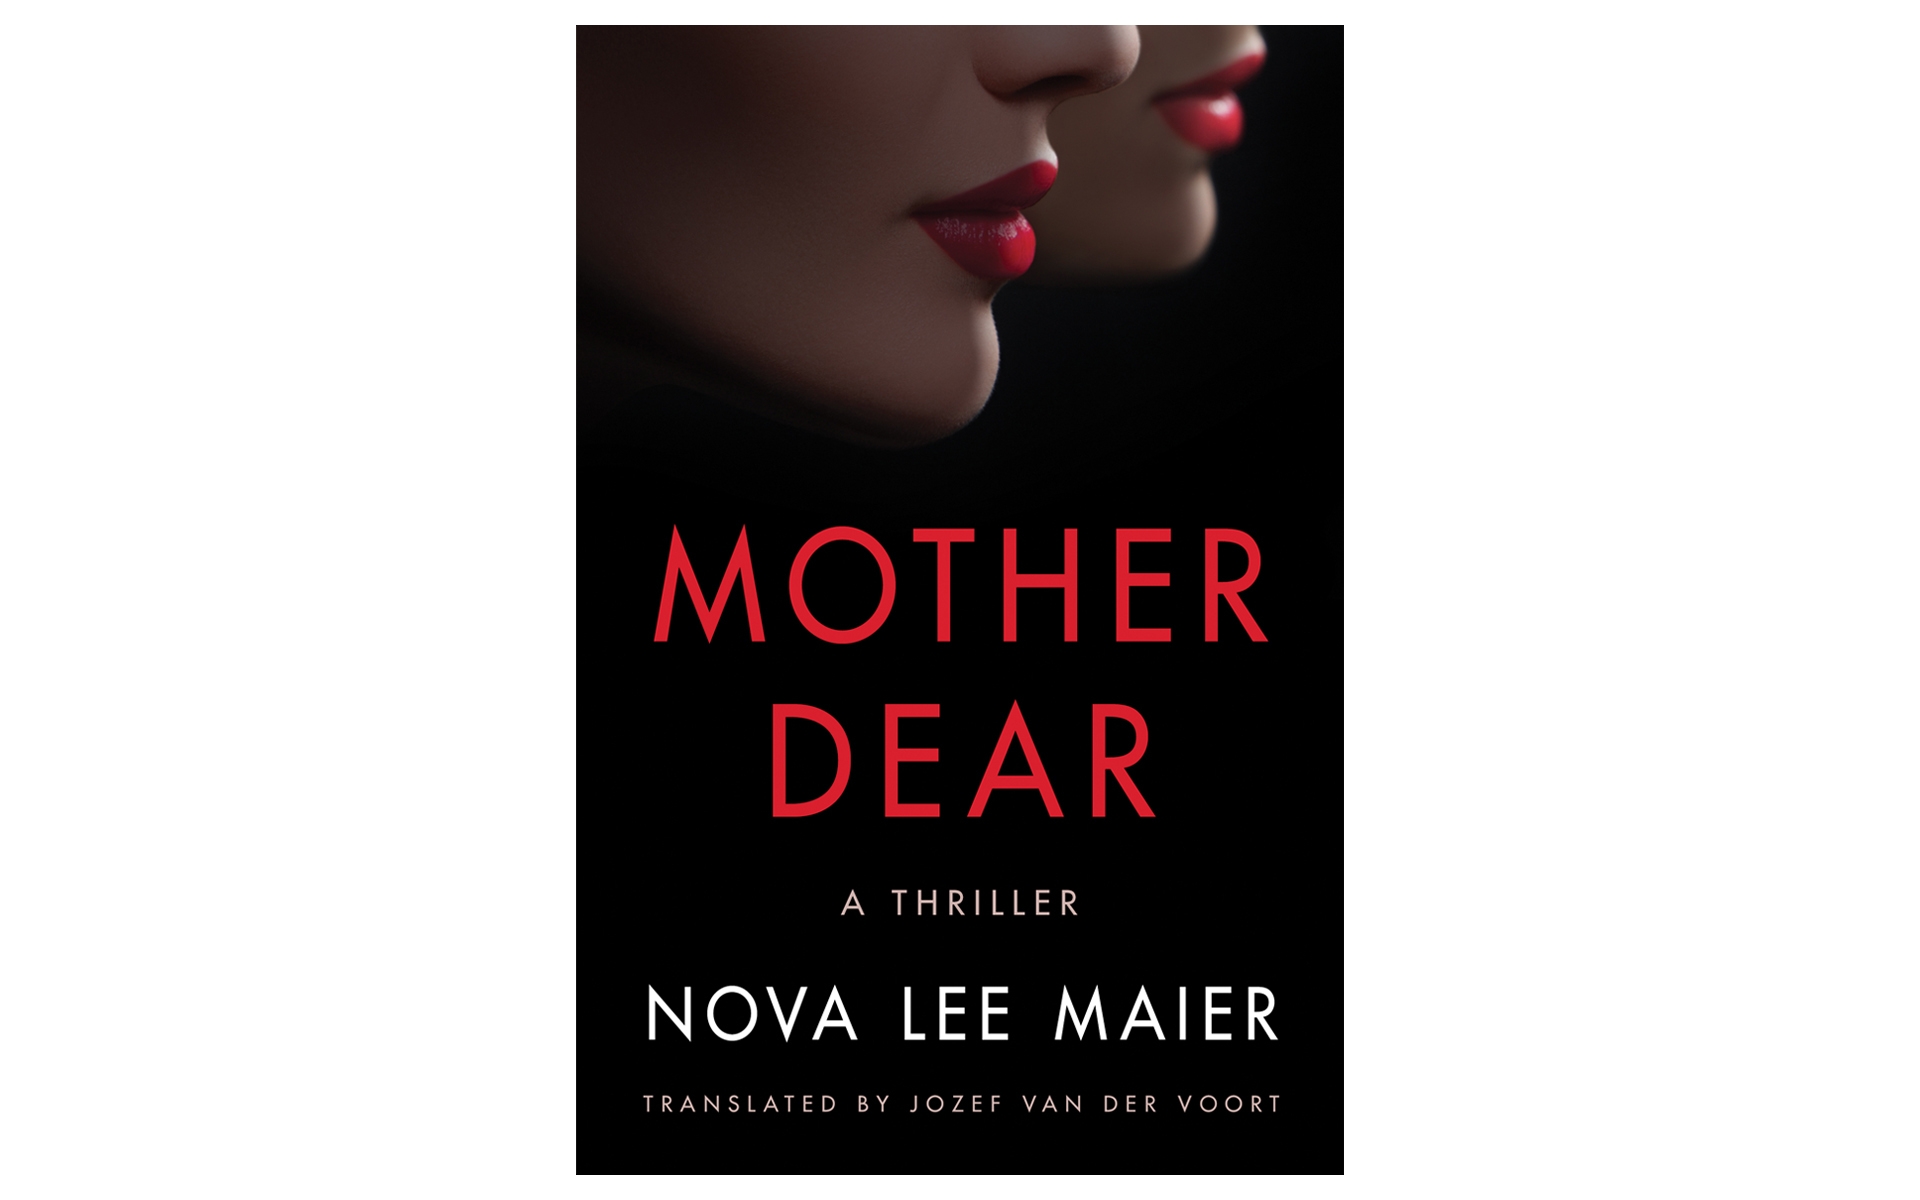 The cover art for the book "Mother Dear"